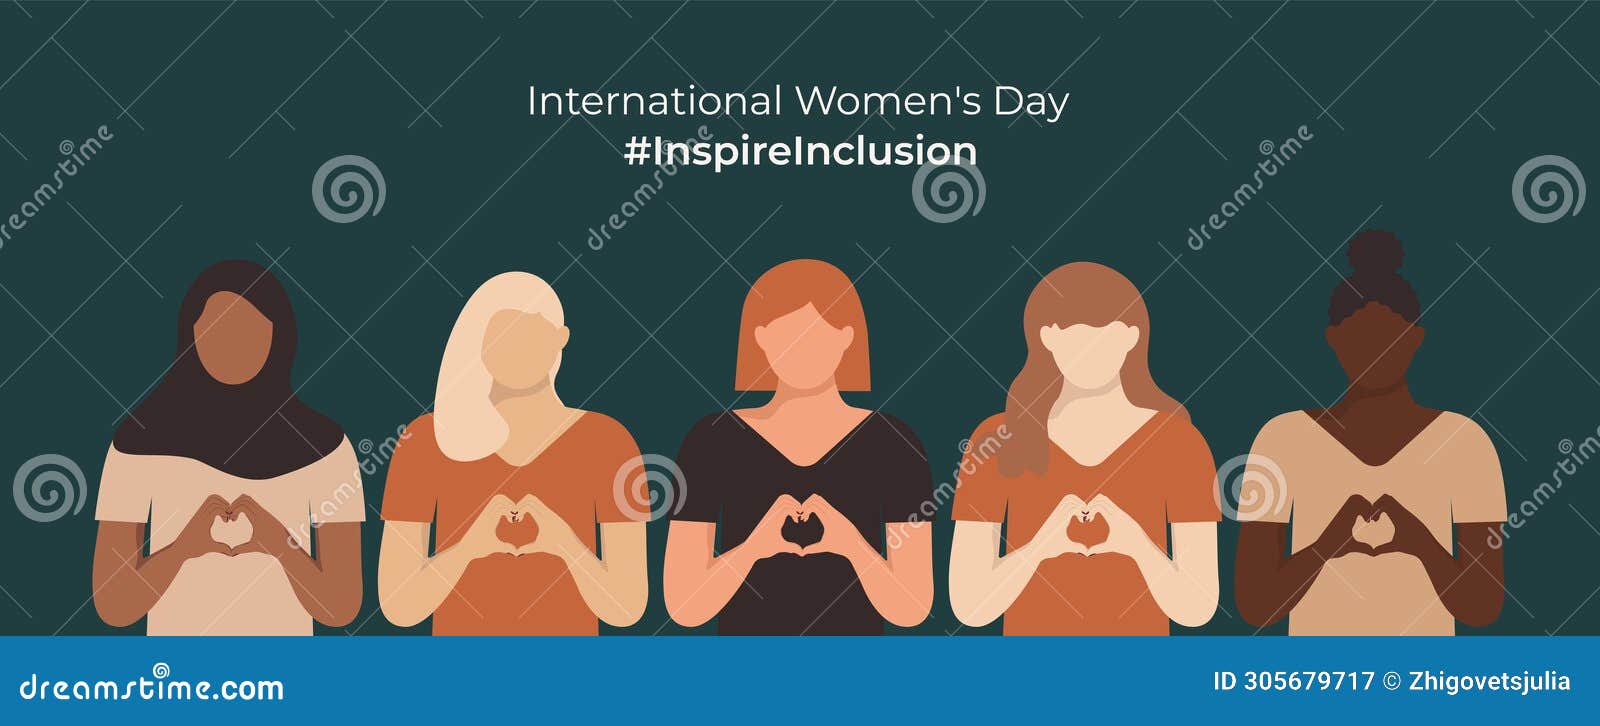 iwd inspireinclusion dark horizontal  with girls shows heart  with their hands. inspire inclusion social campaign.